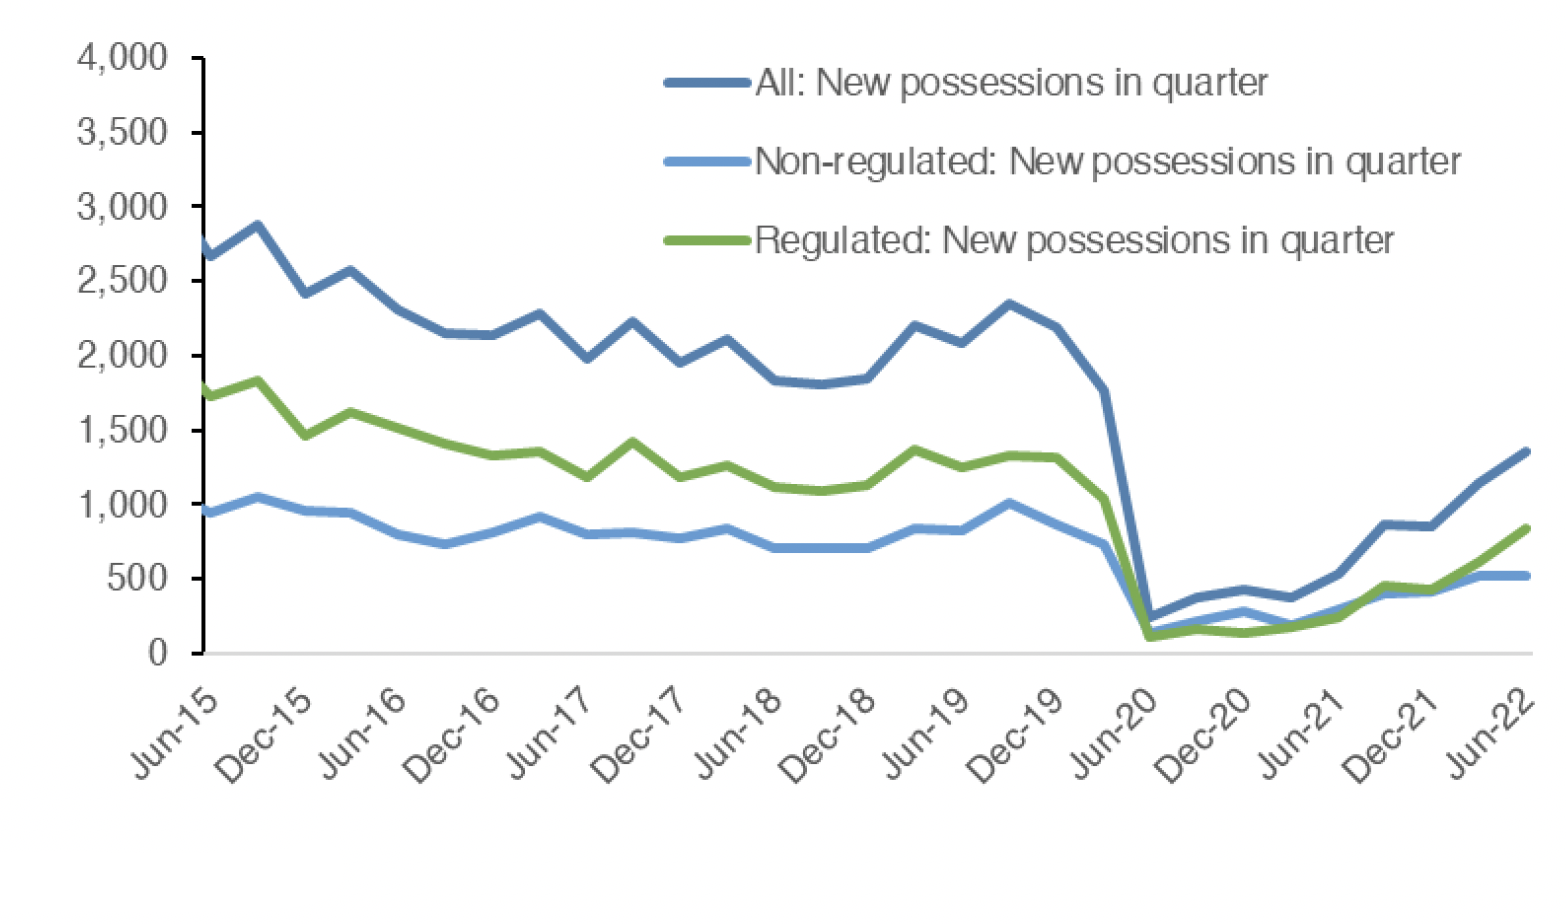 Chart 7.3 outlines how the number of new possessions has progressed over time, split into regulated, non-regulated and all possessions. This covers the period from Q2 2015 to Q2 2022. 